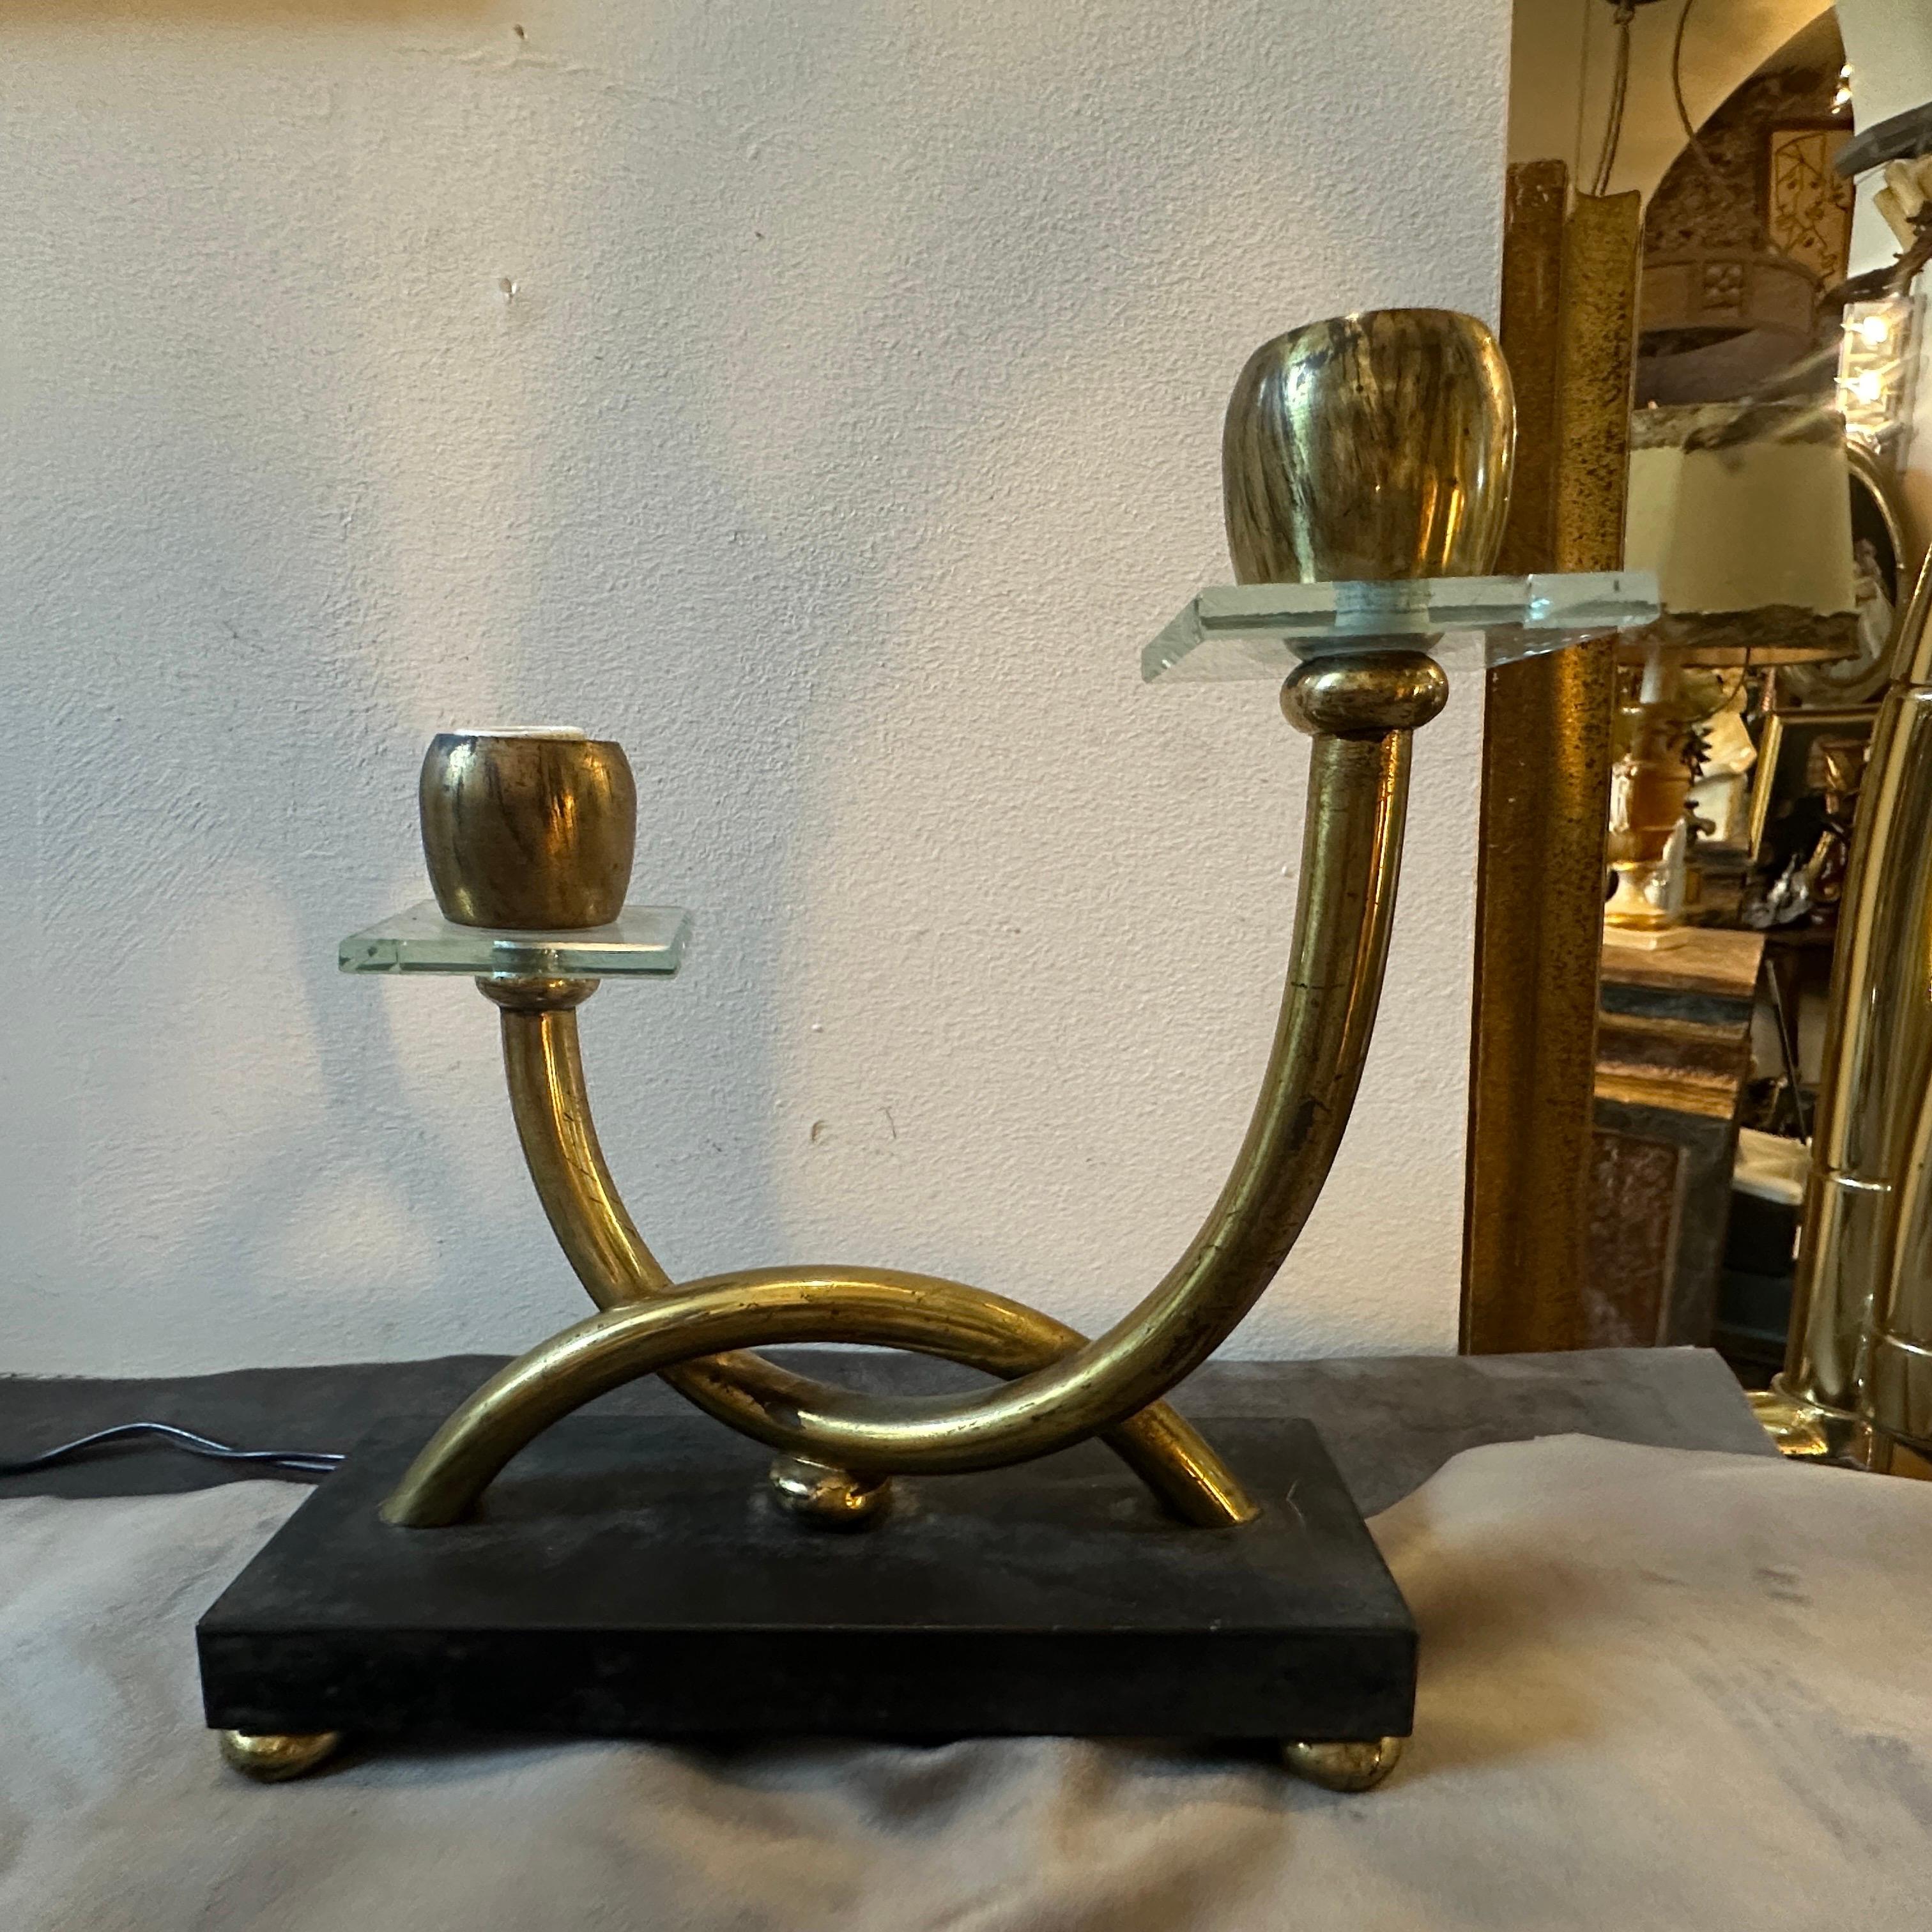 Two 1930s Giò Ponti style Art Deco Brass, Marble and Glass Italian Table Lamps For Sale 1